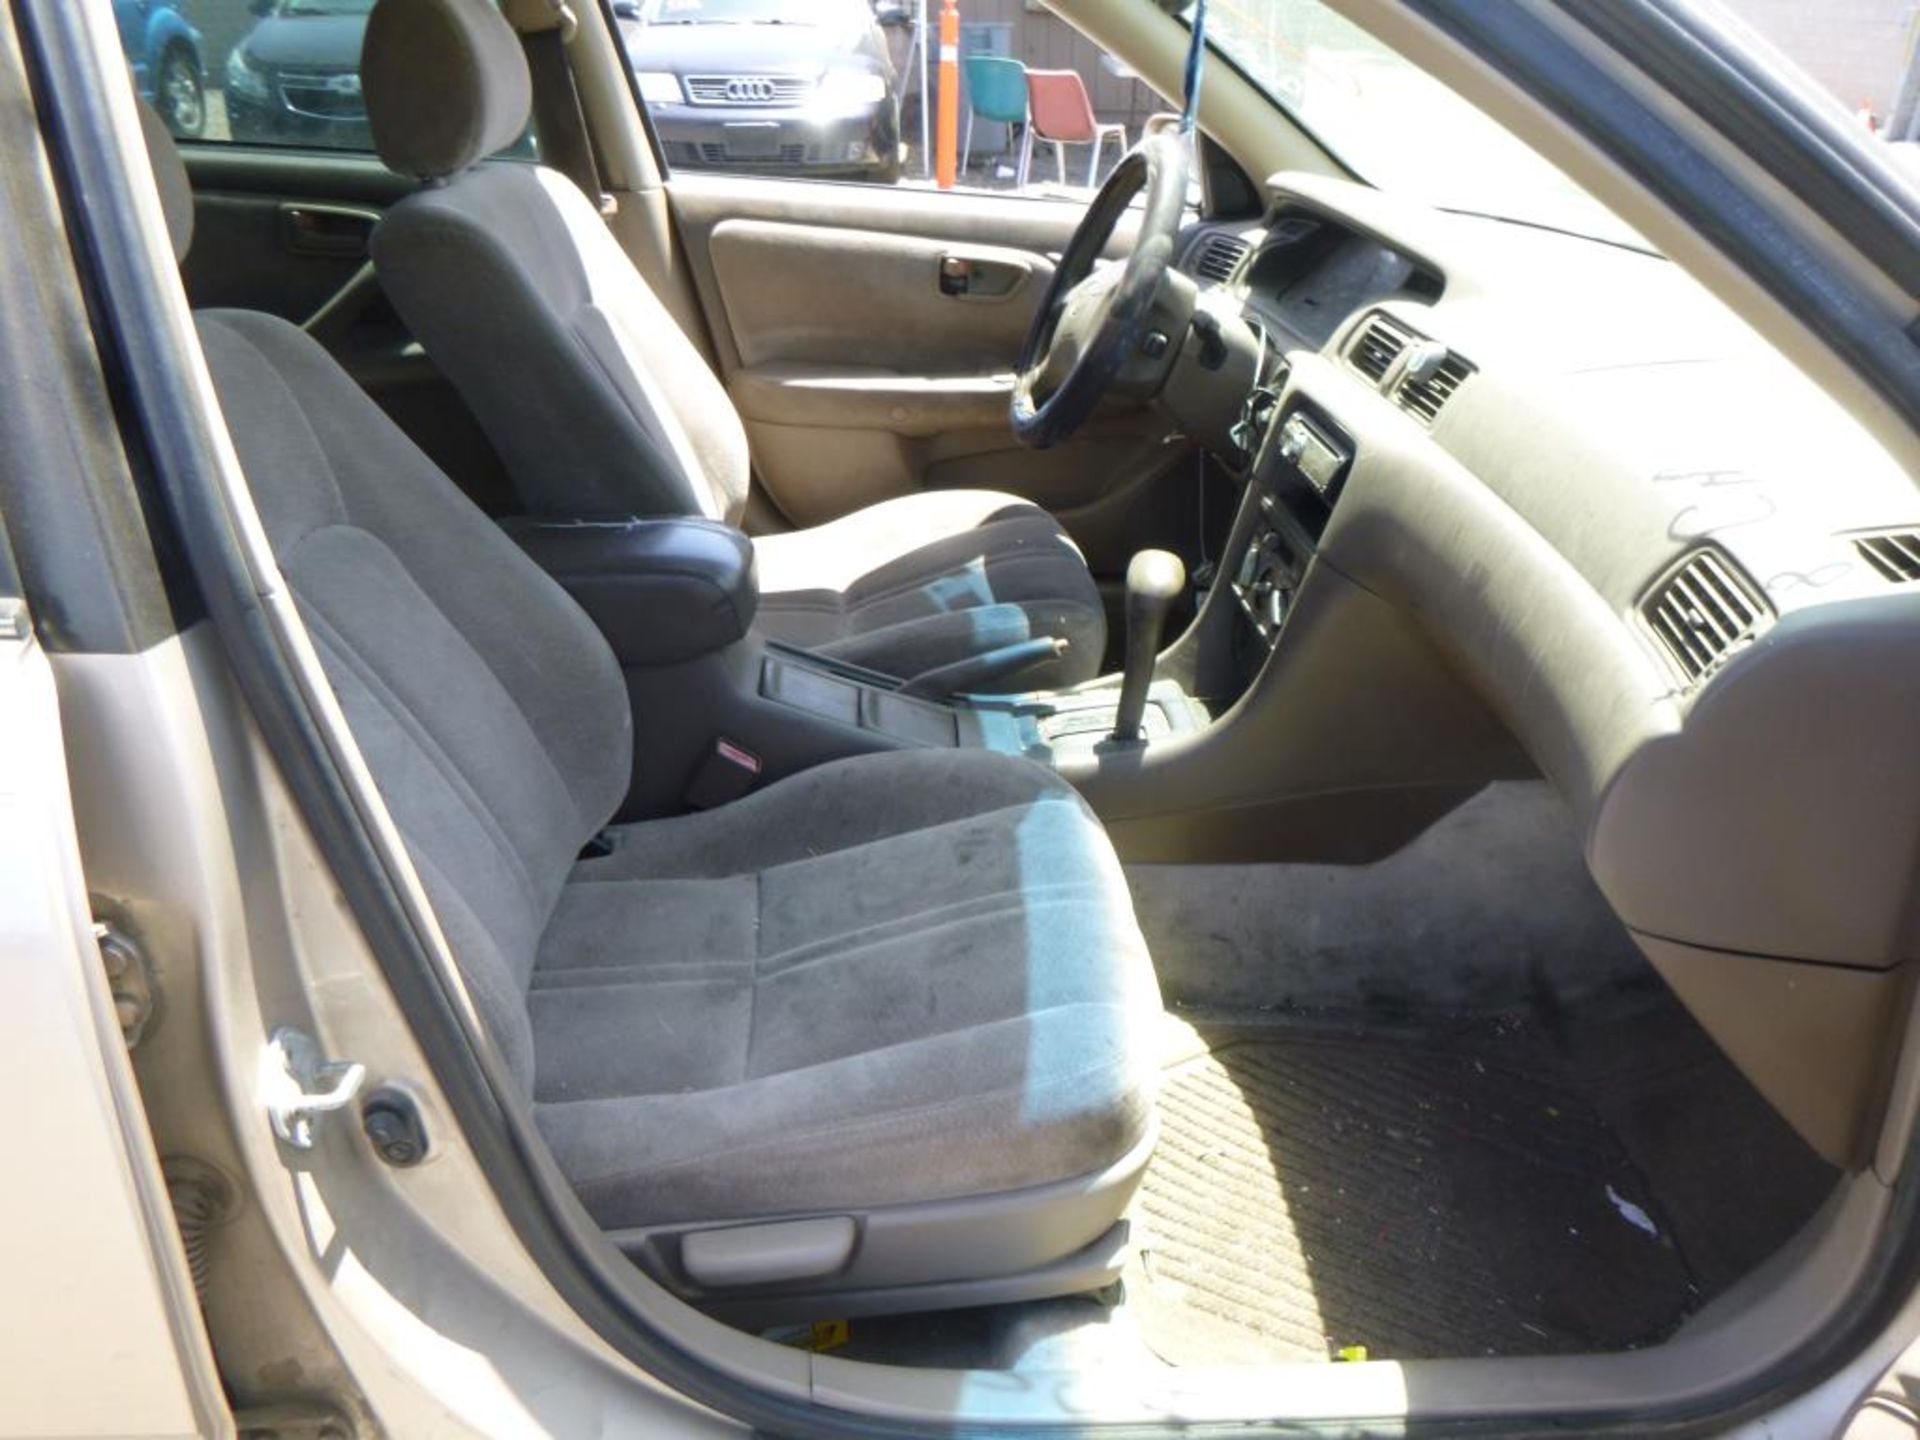 (Lot # 3306) 1997 Toyota Camry - Image 10 of 15